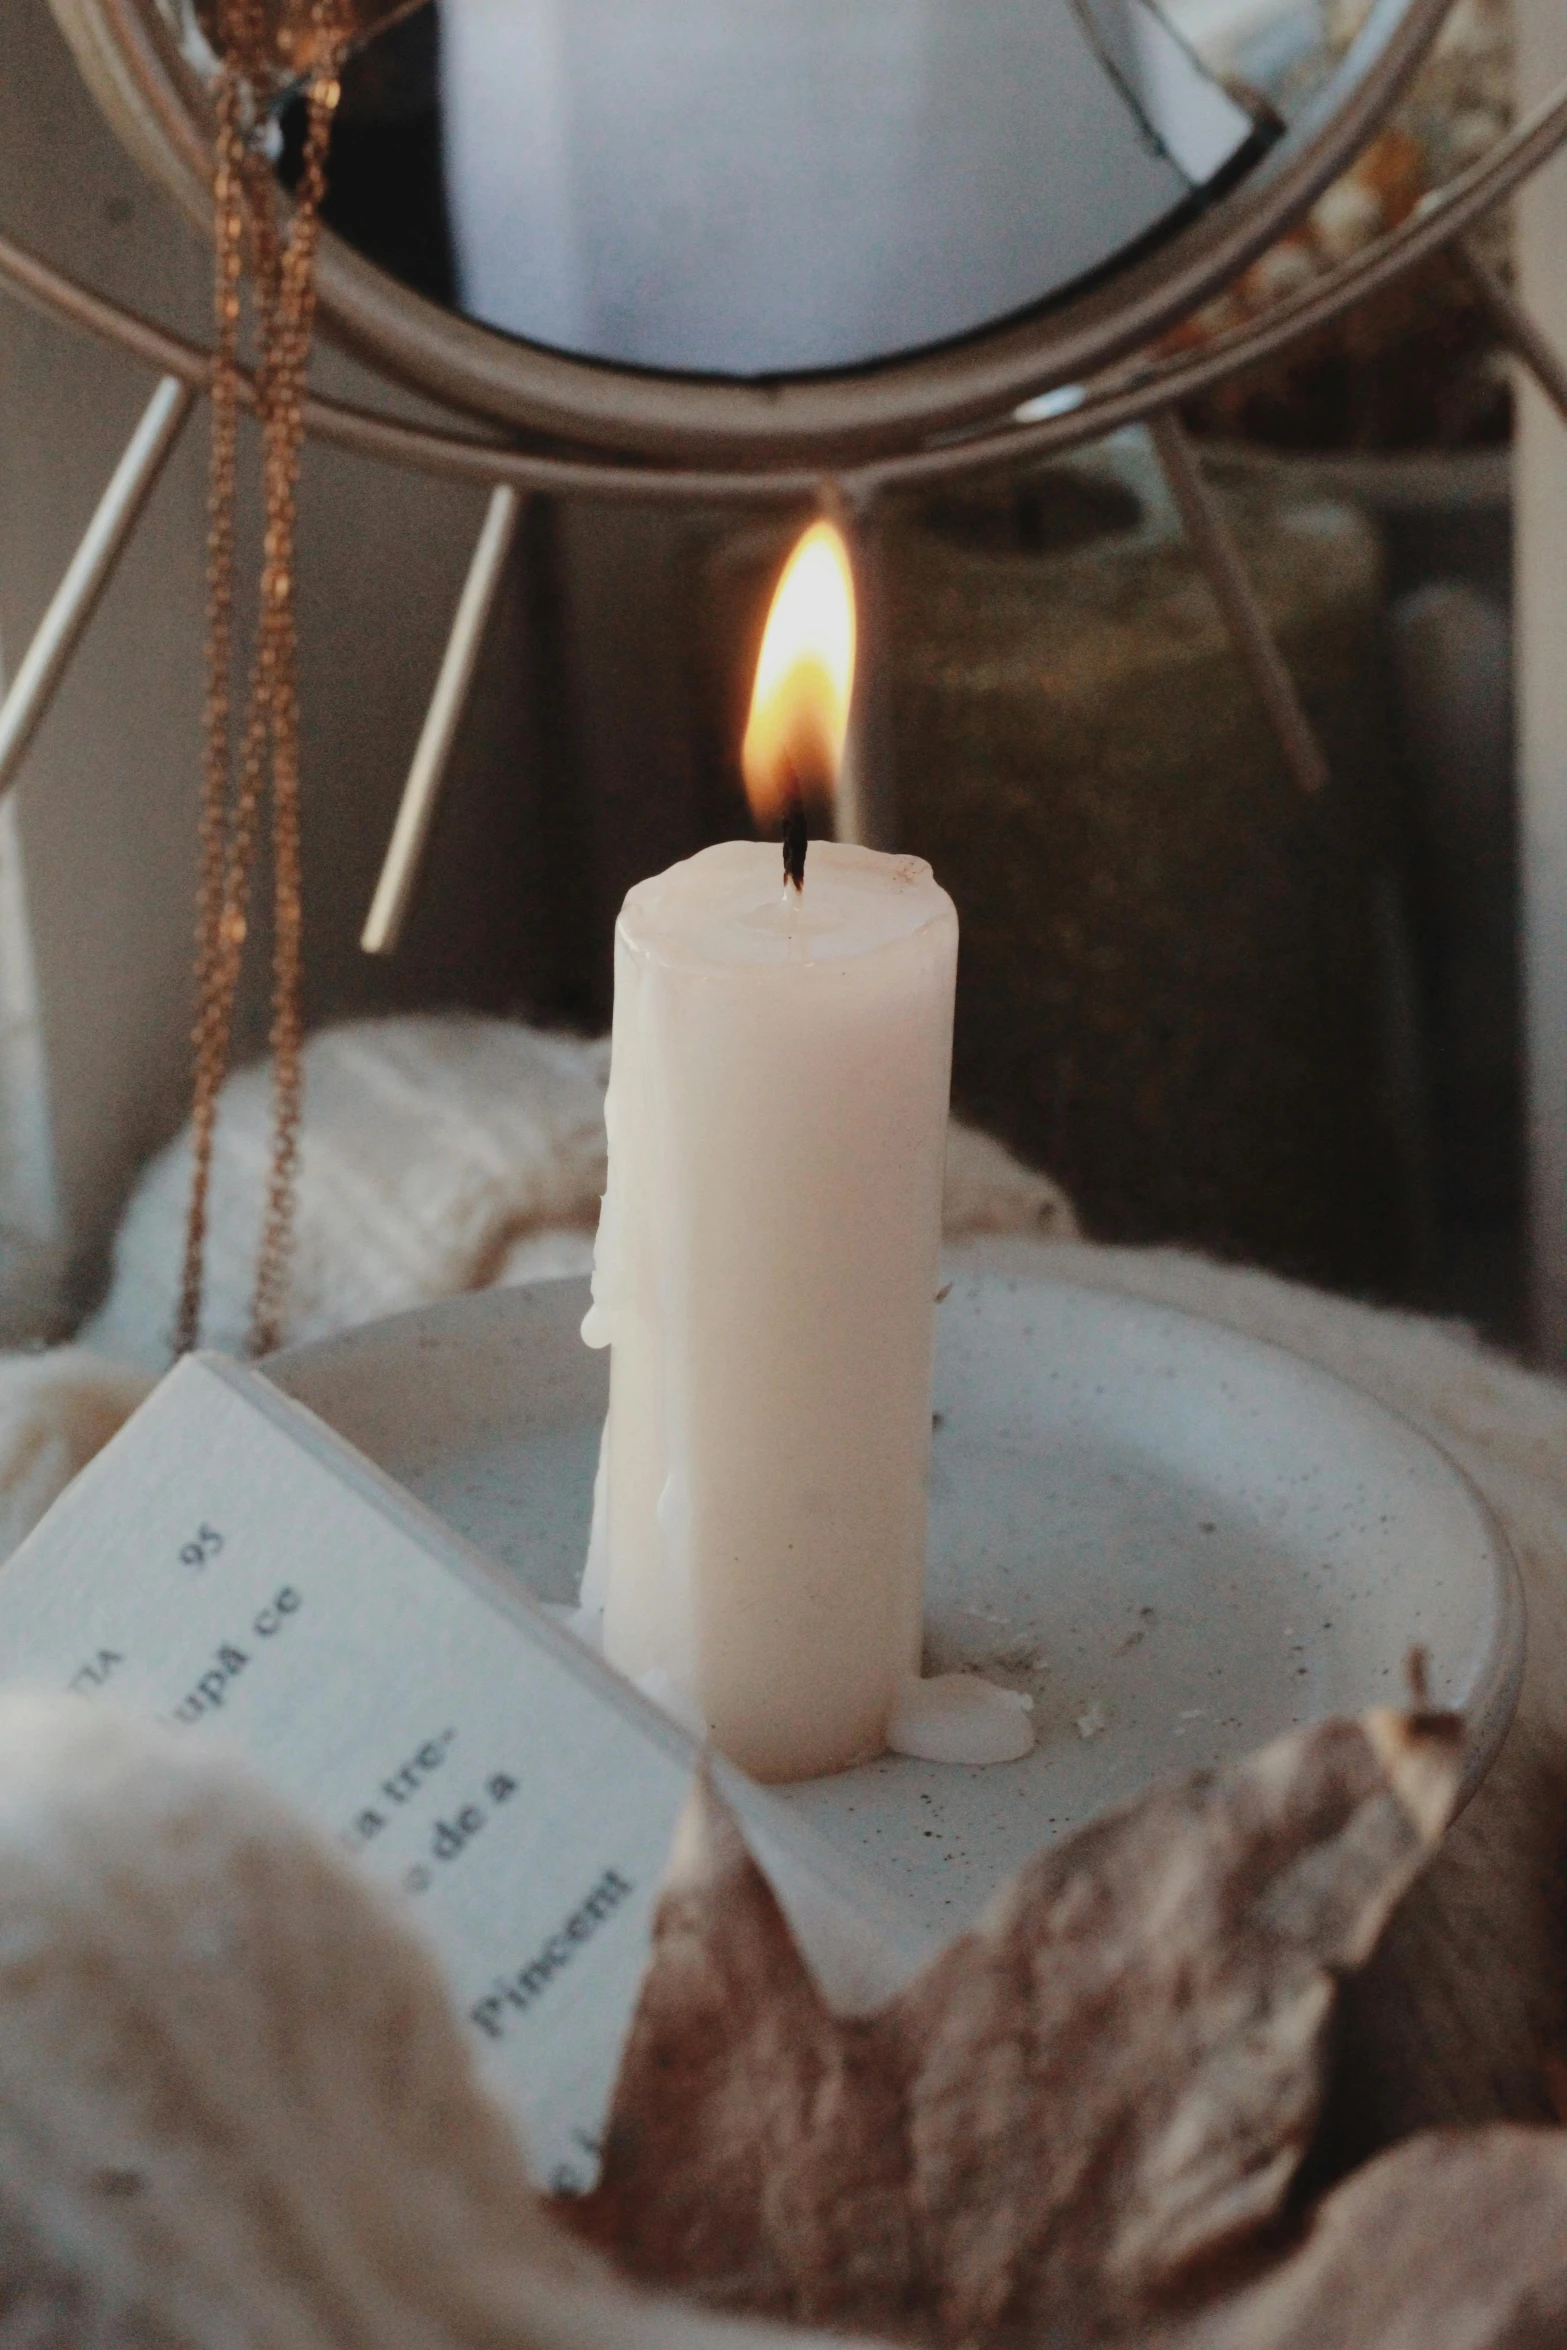 a candle is placed on a plate with a book